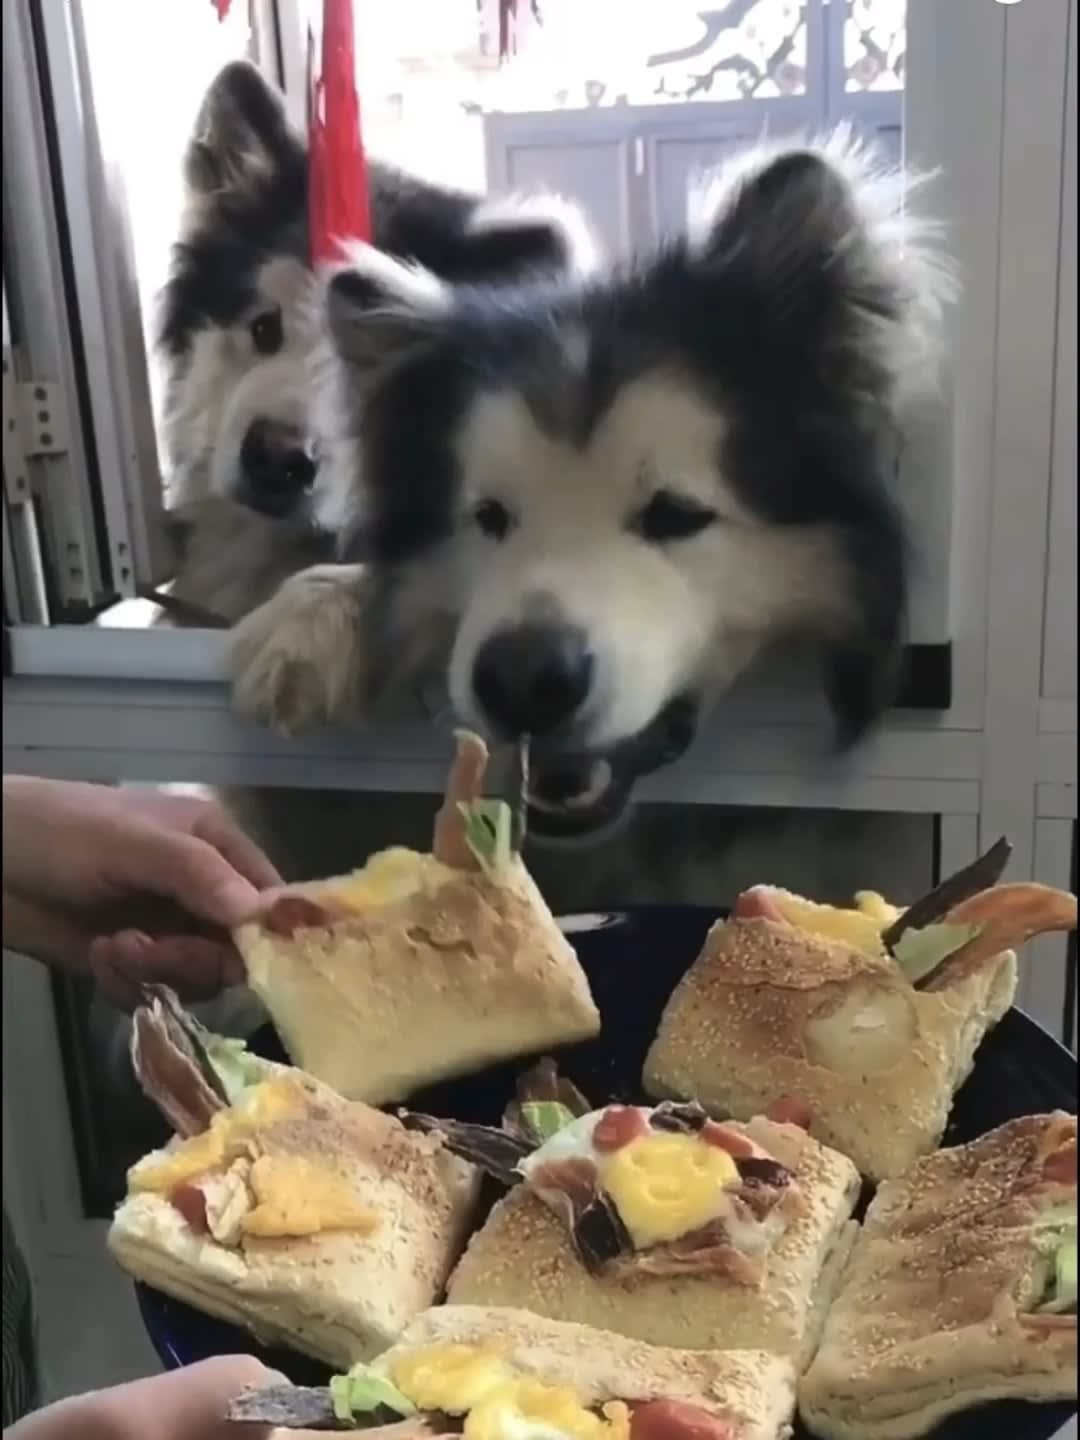 These malamutes got me started digging for more videos